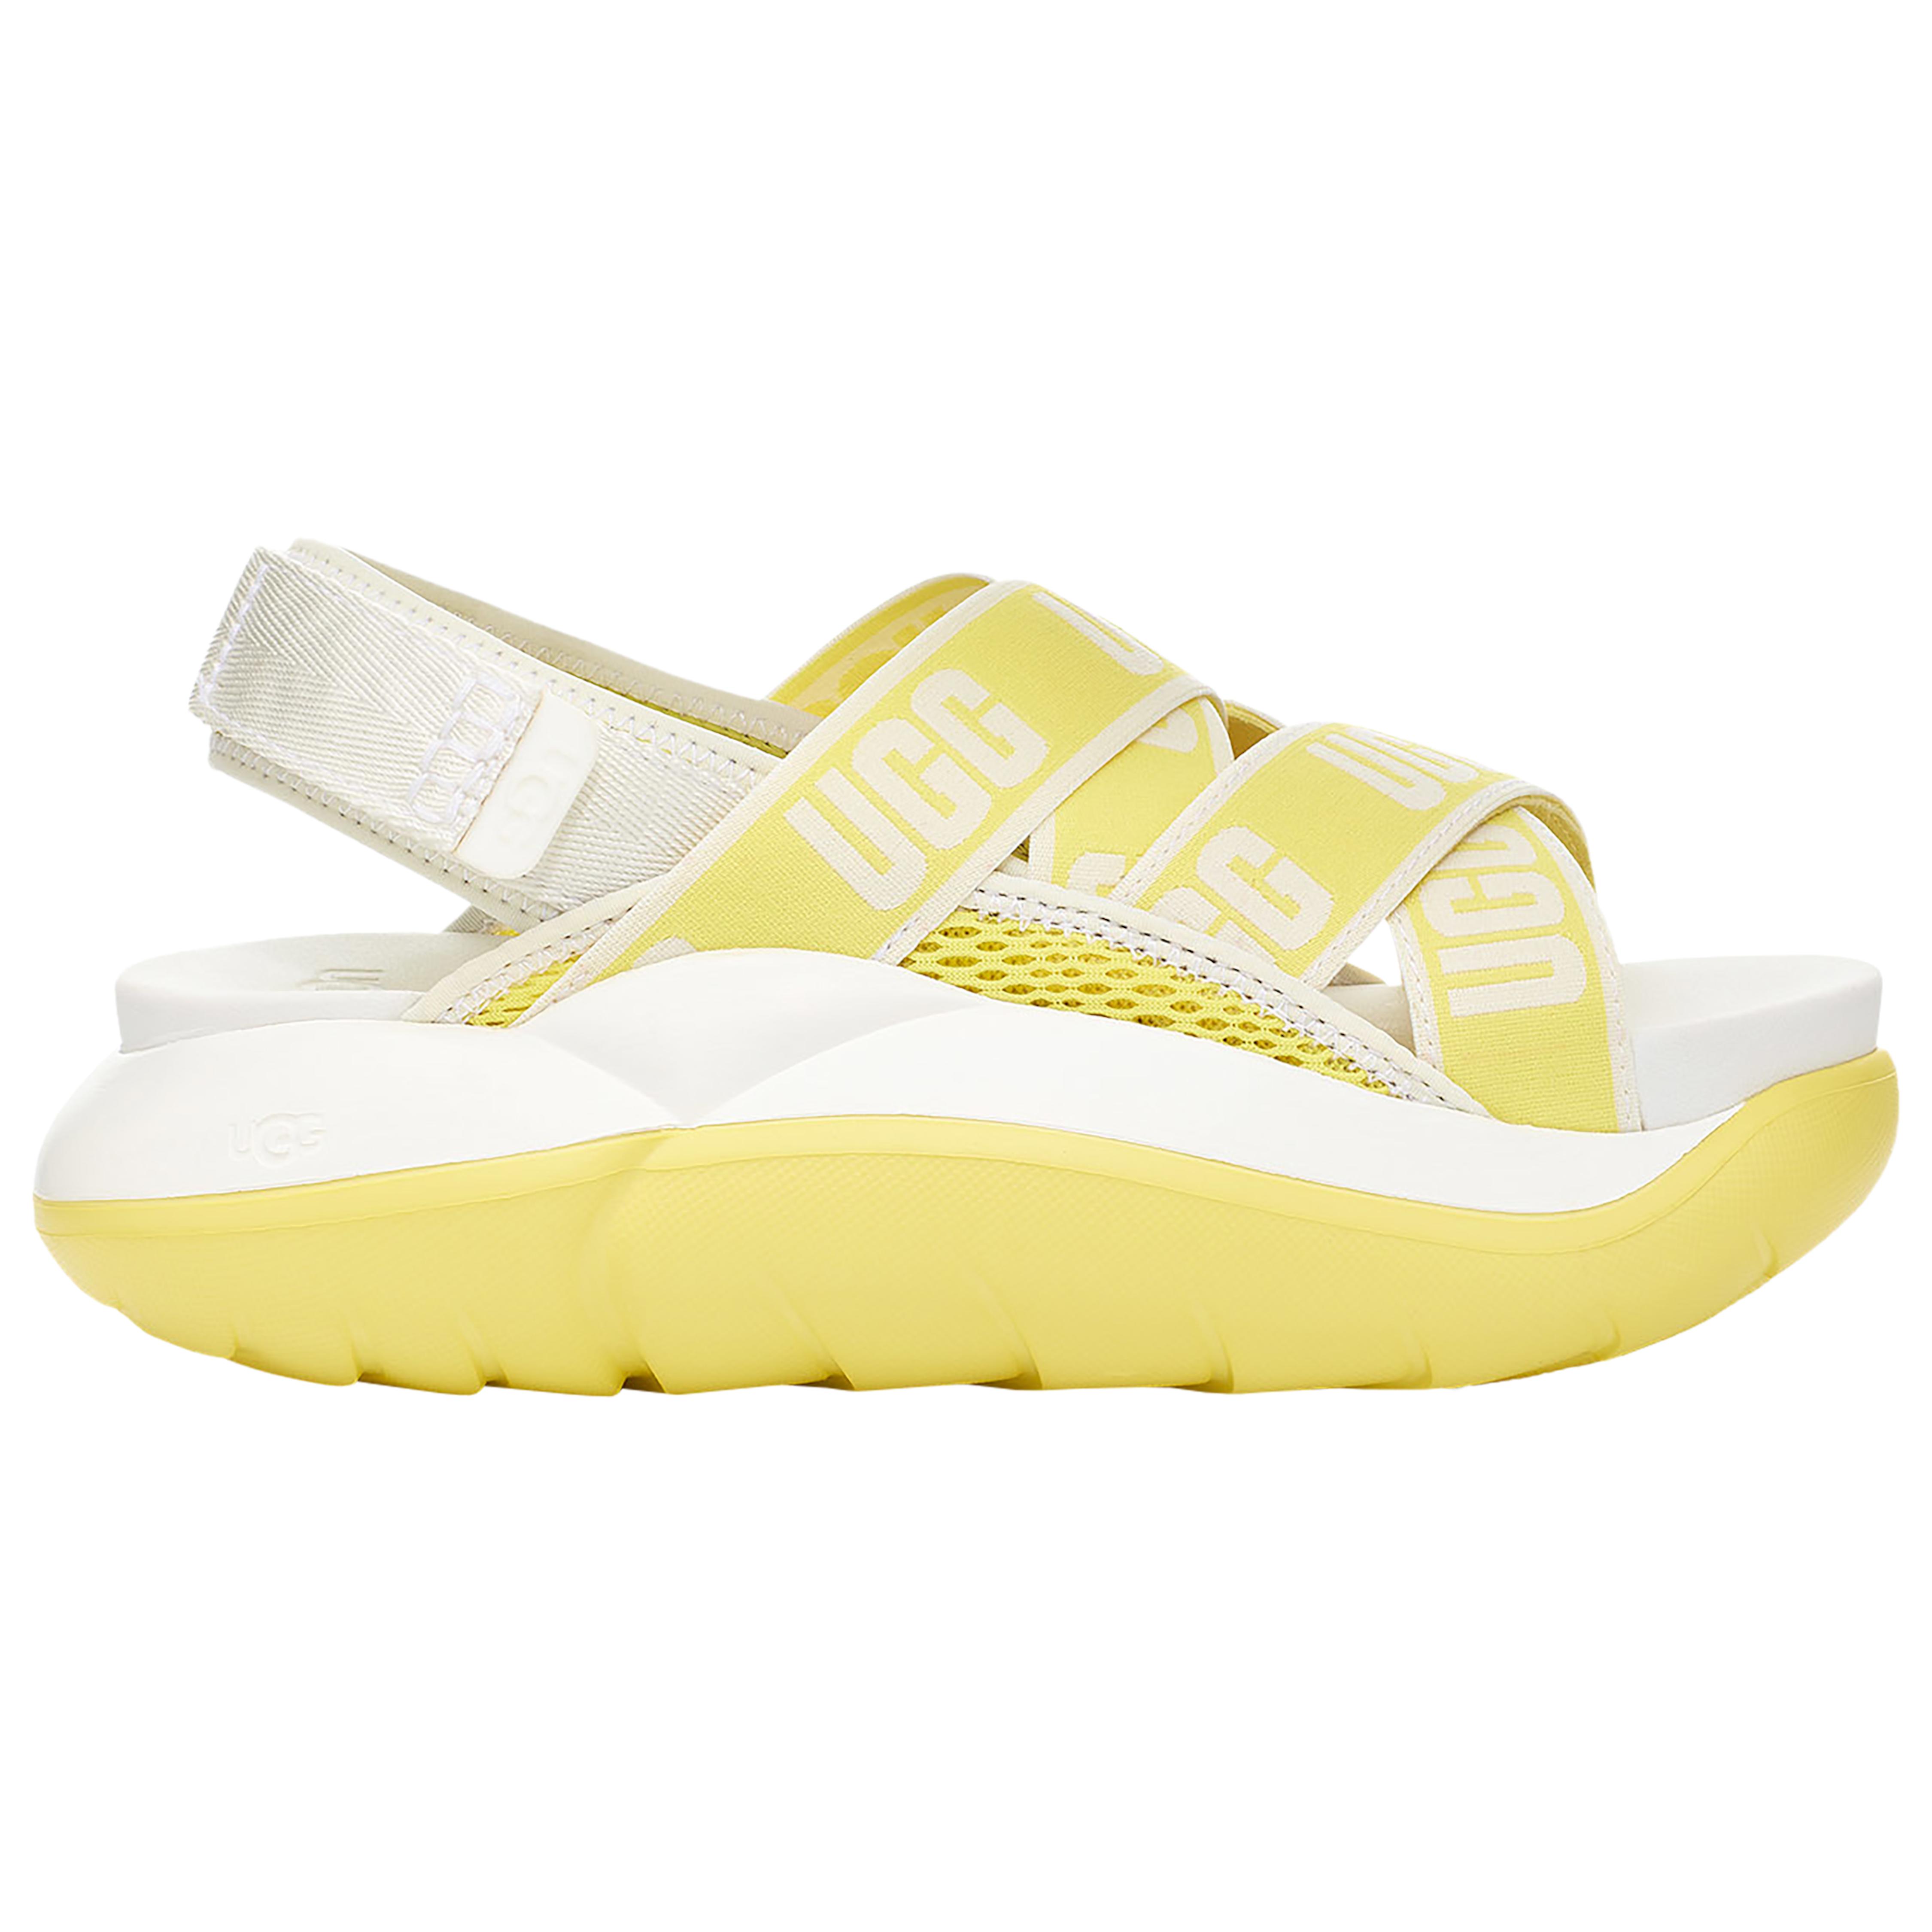 UGG L.a. Cloud Sandal in Yellow - Lyst